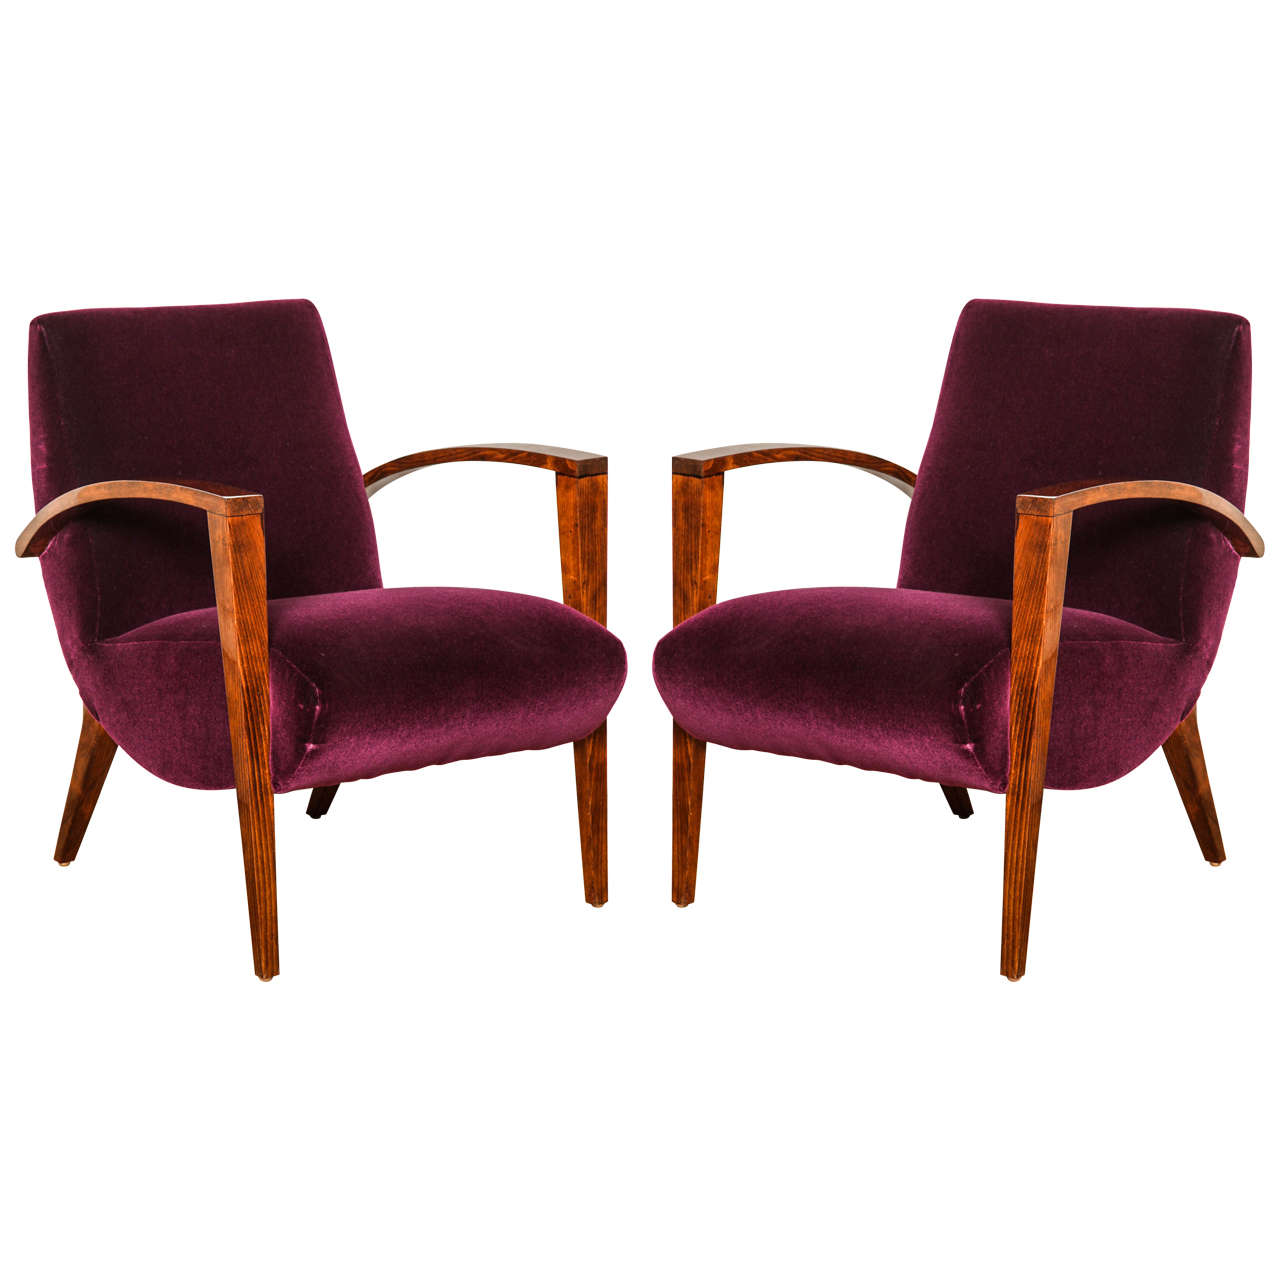 Chic Mid-Century Modern Pair of Armchairs For Sale